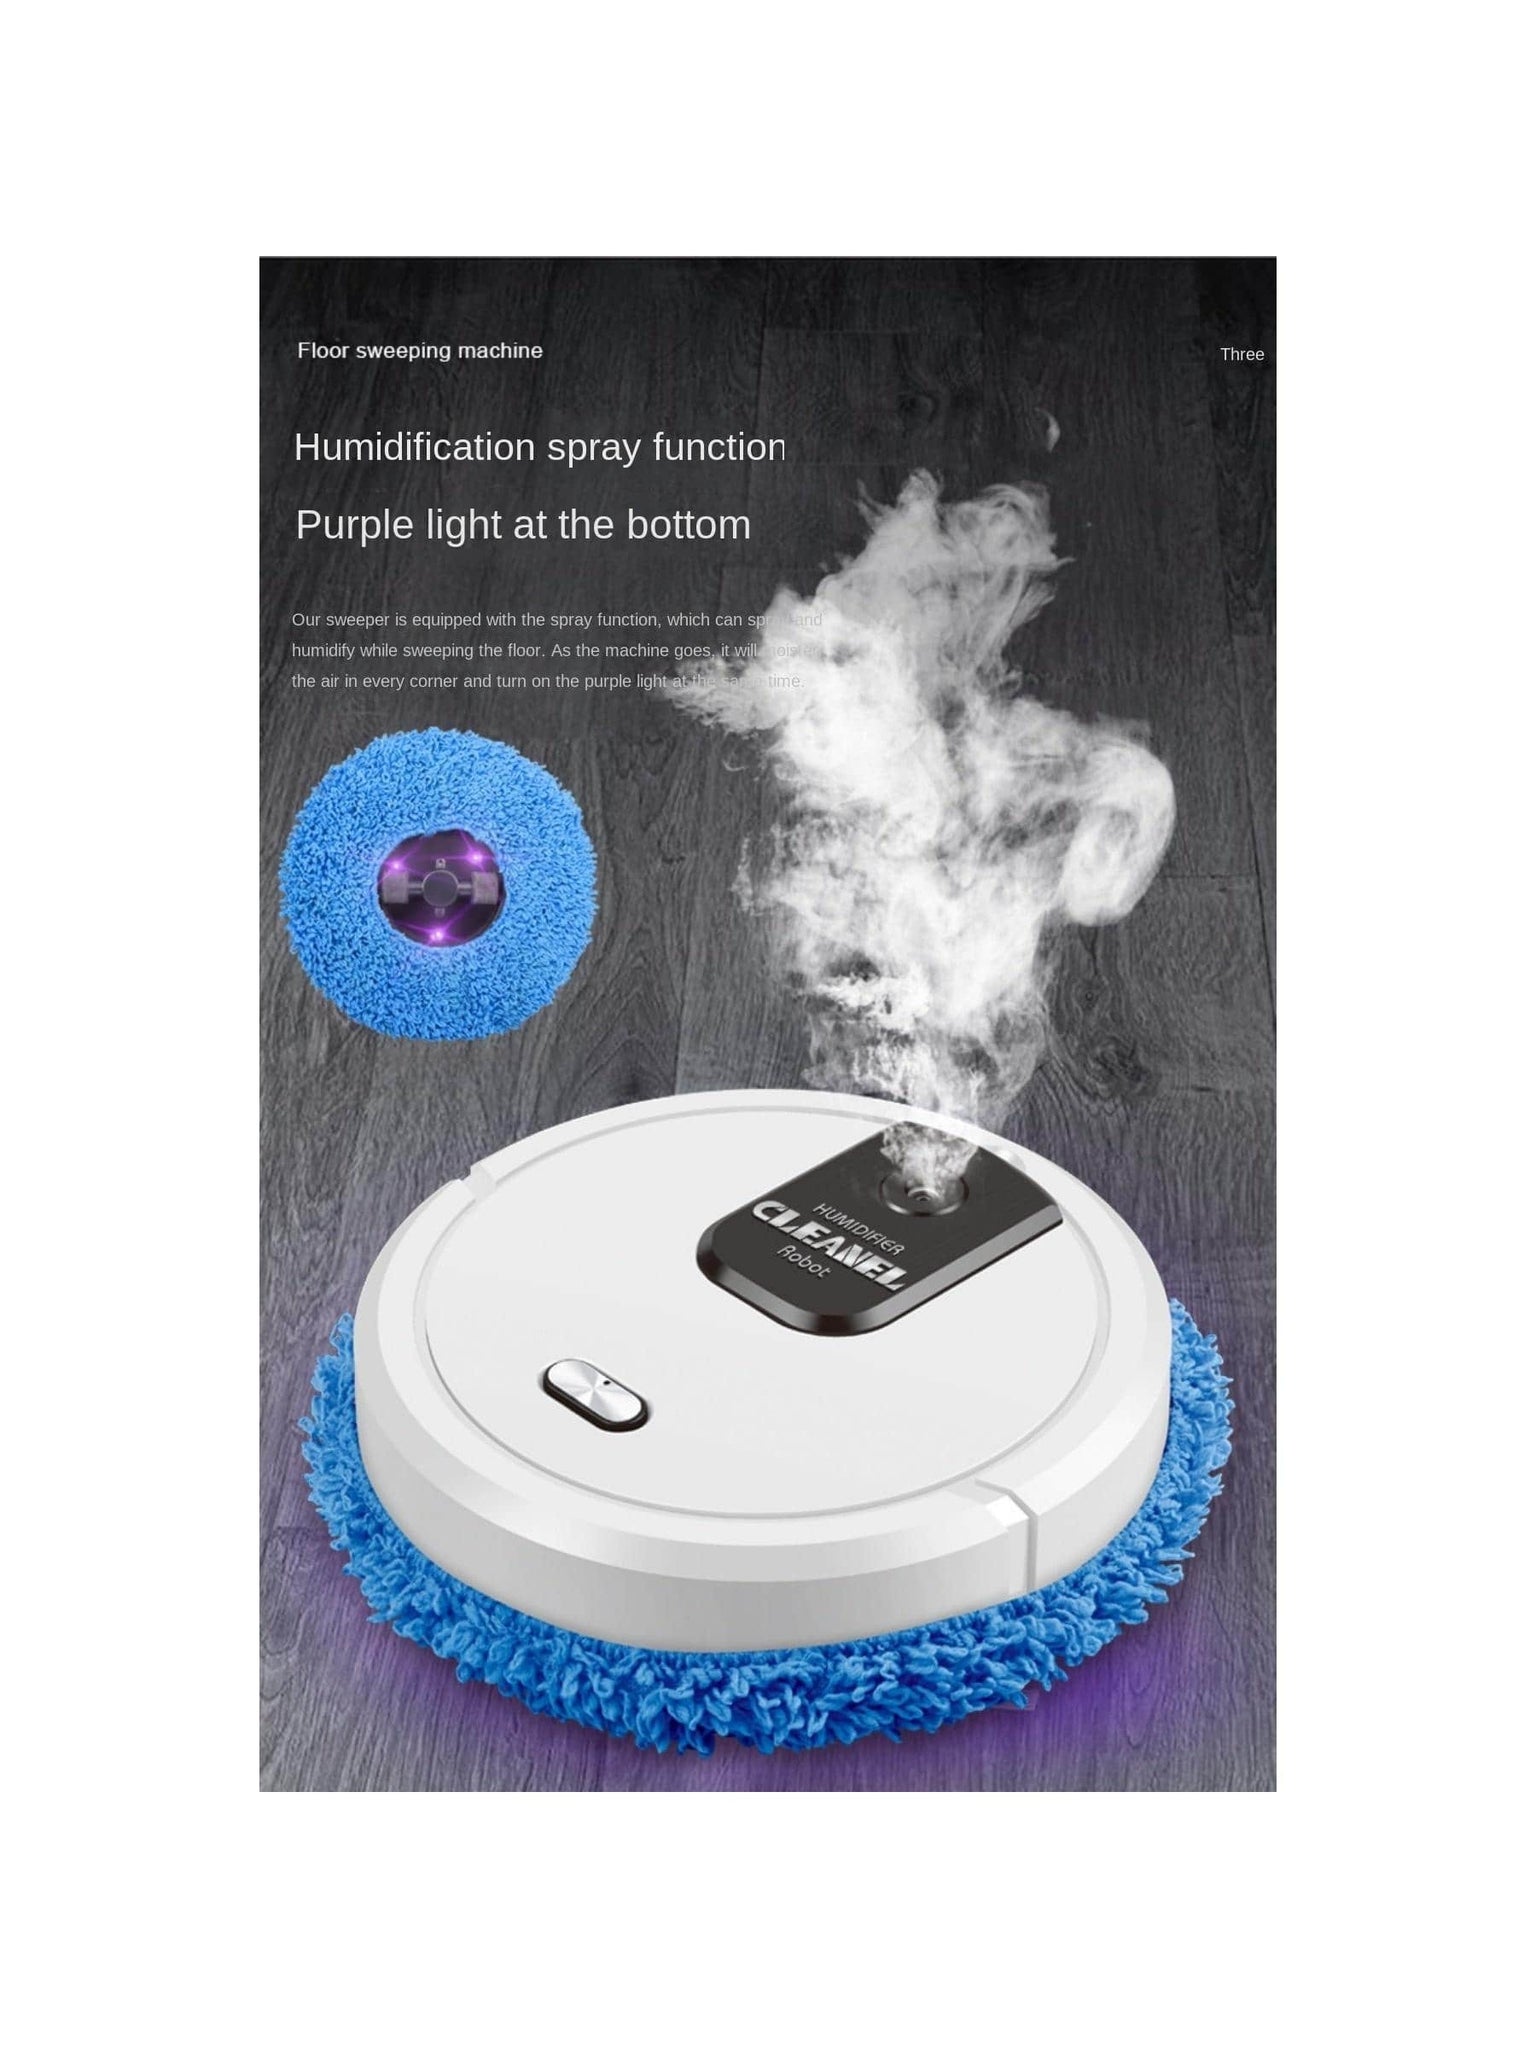 Household Portable Mopping Robot Humidifier Spray Wet and Dry Cleaning Mopping Robot Floor Mopping Robot Machine-White-1